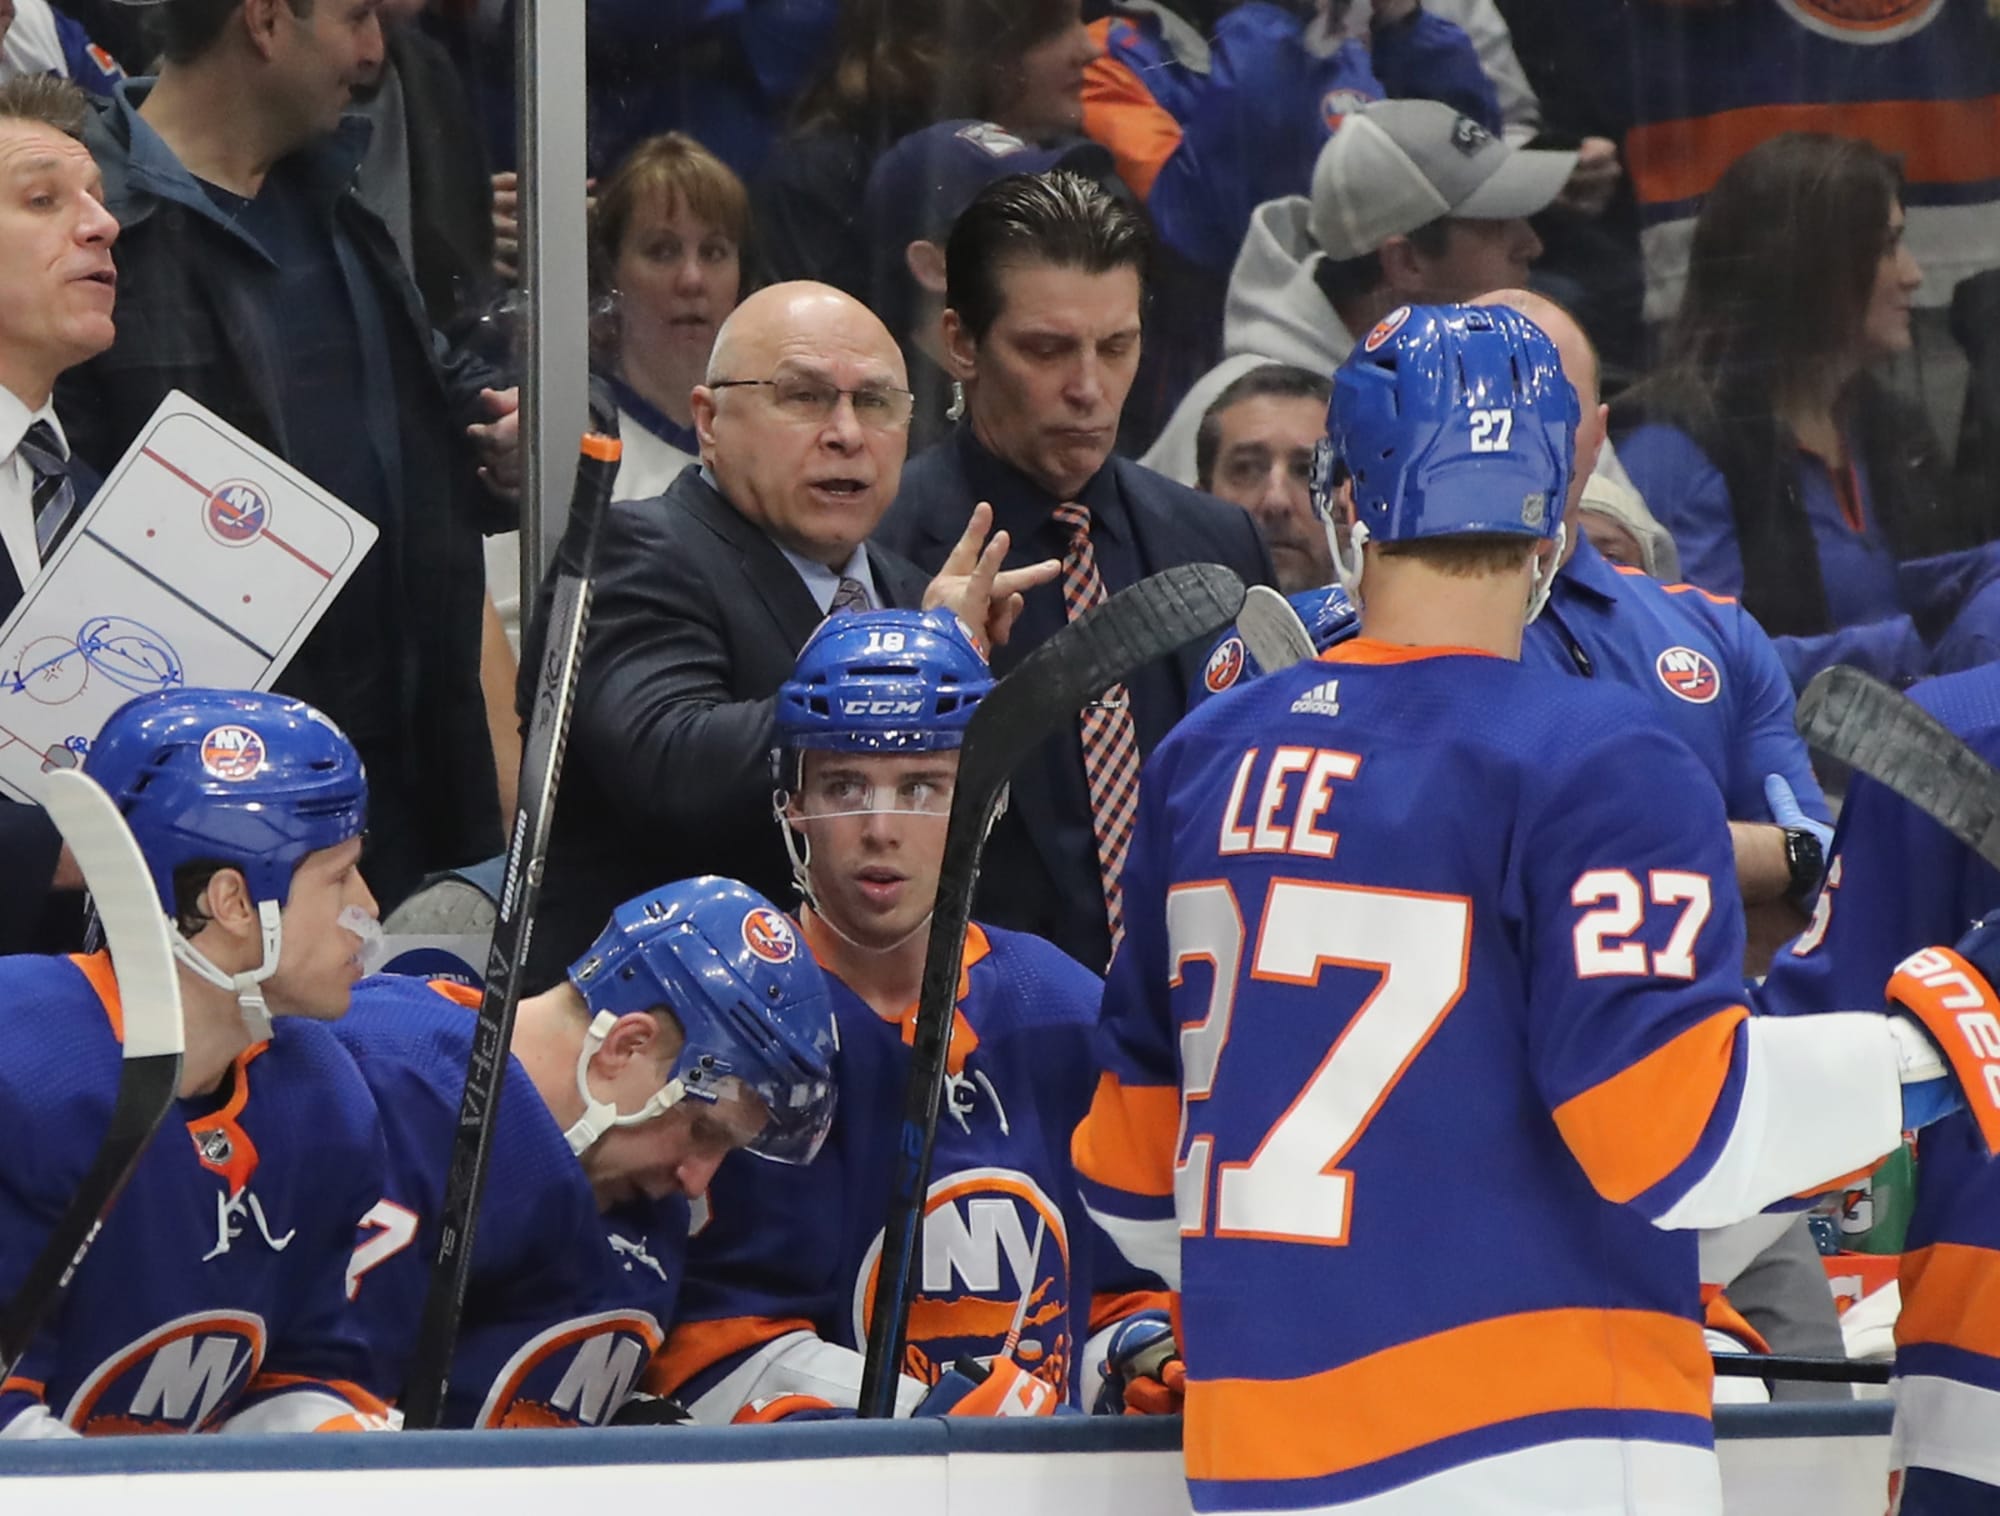 New York Rangers: Now that the Isles are done, let's talk about Barry Trotz